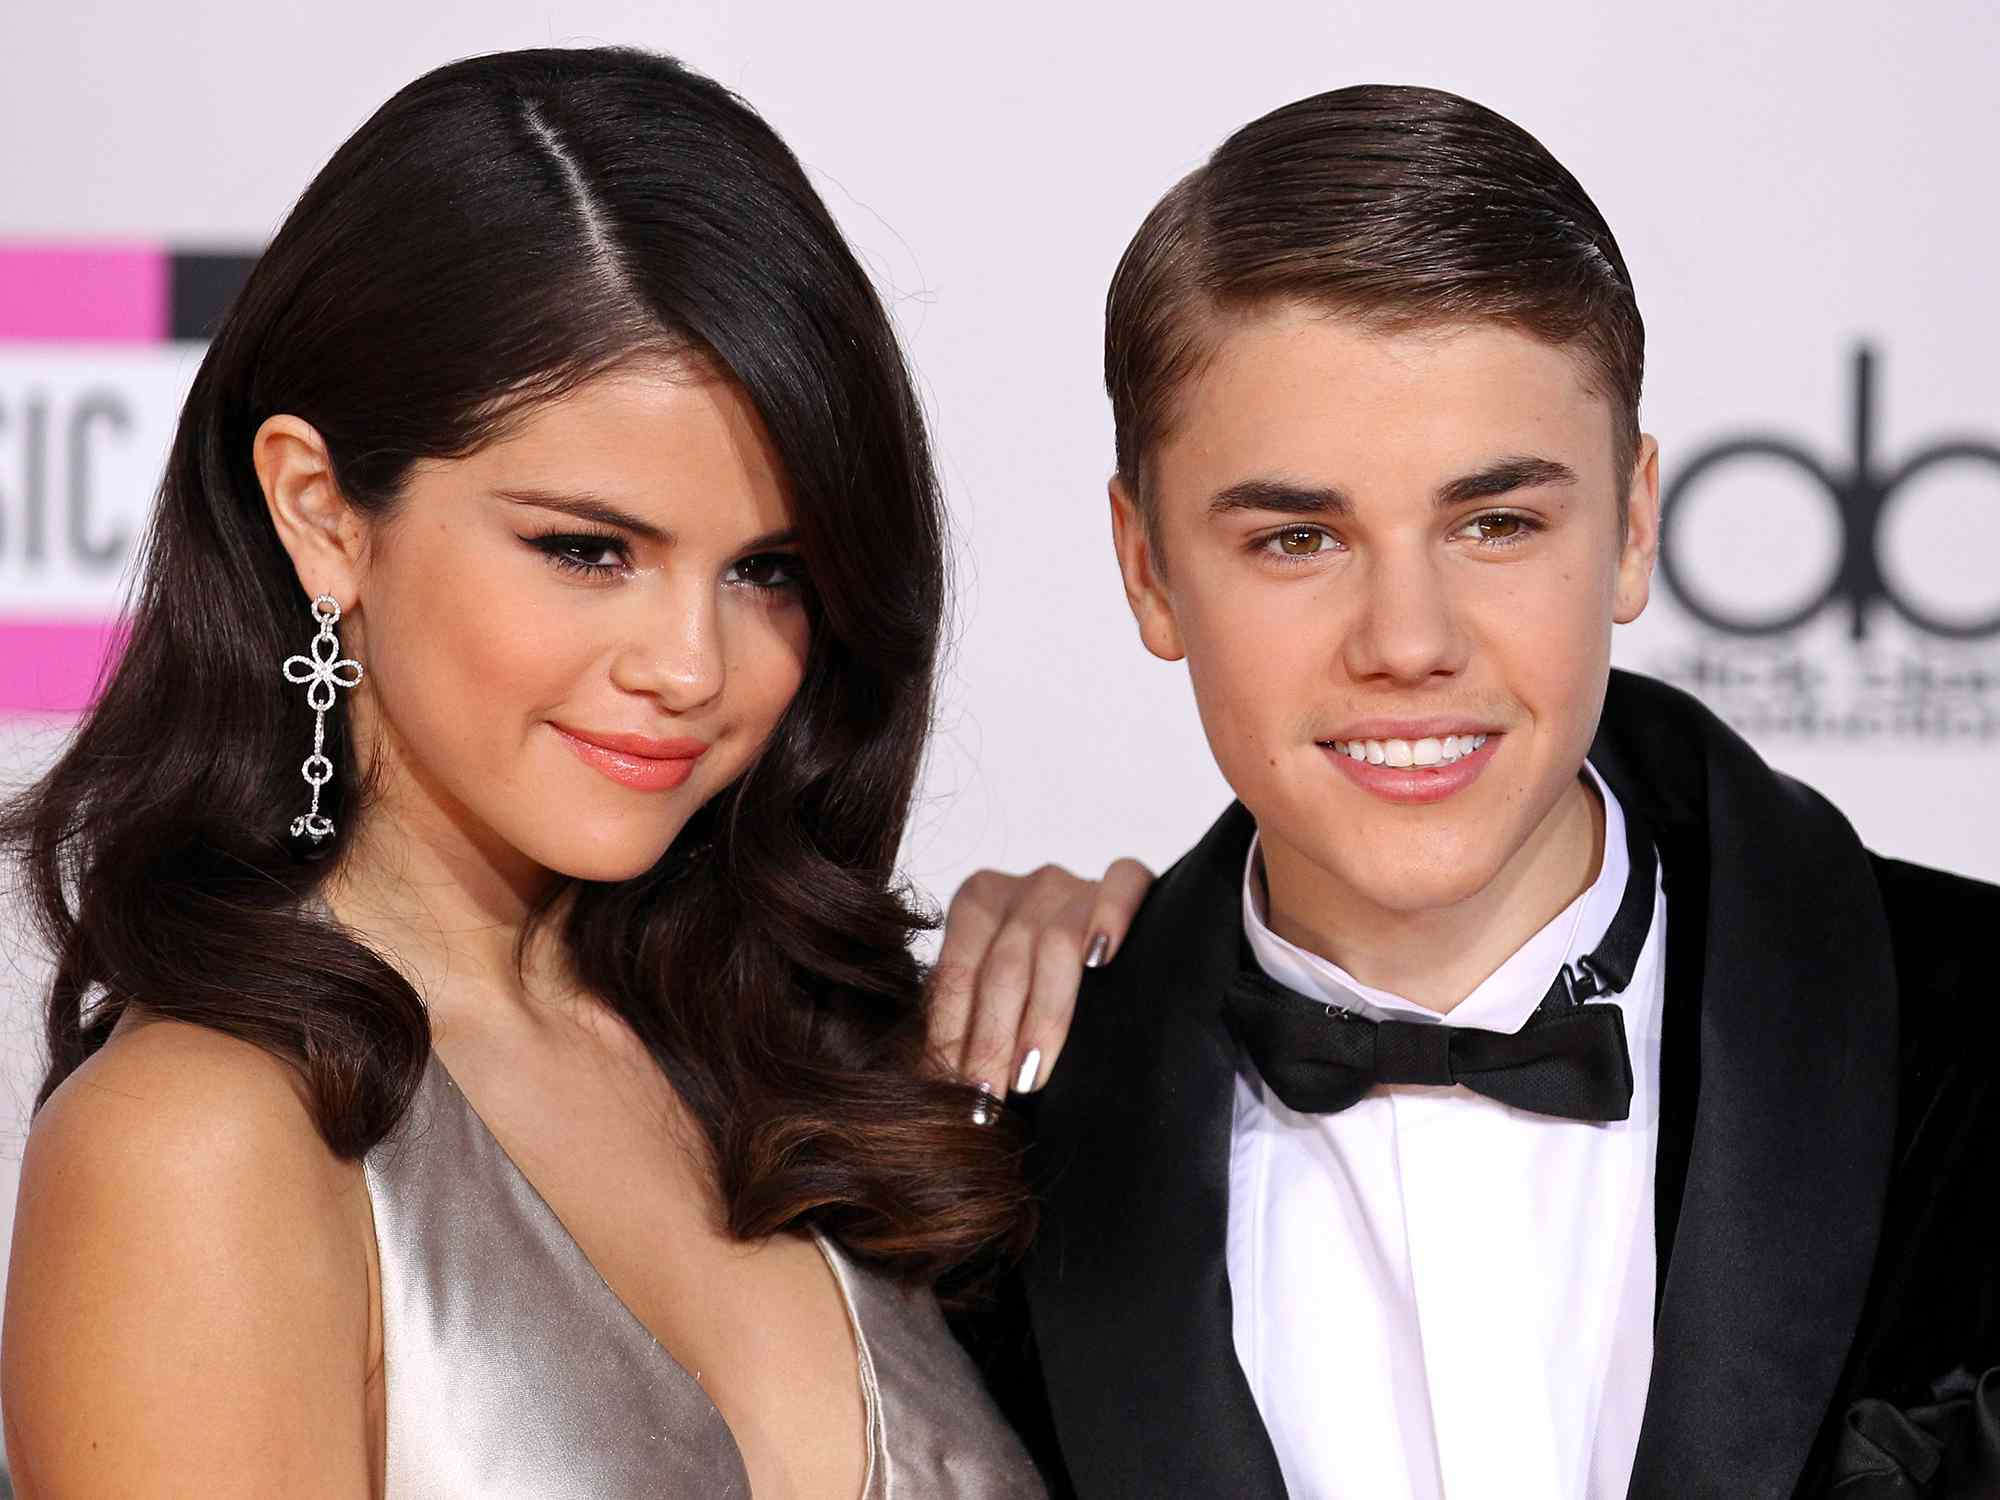 Selena Gomez and Justin Bieber arrive at the 2011 American Music Awards held at Nokia Theatre L.A. LIVE on November 20, 2011 in Los Angeles, California